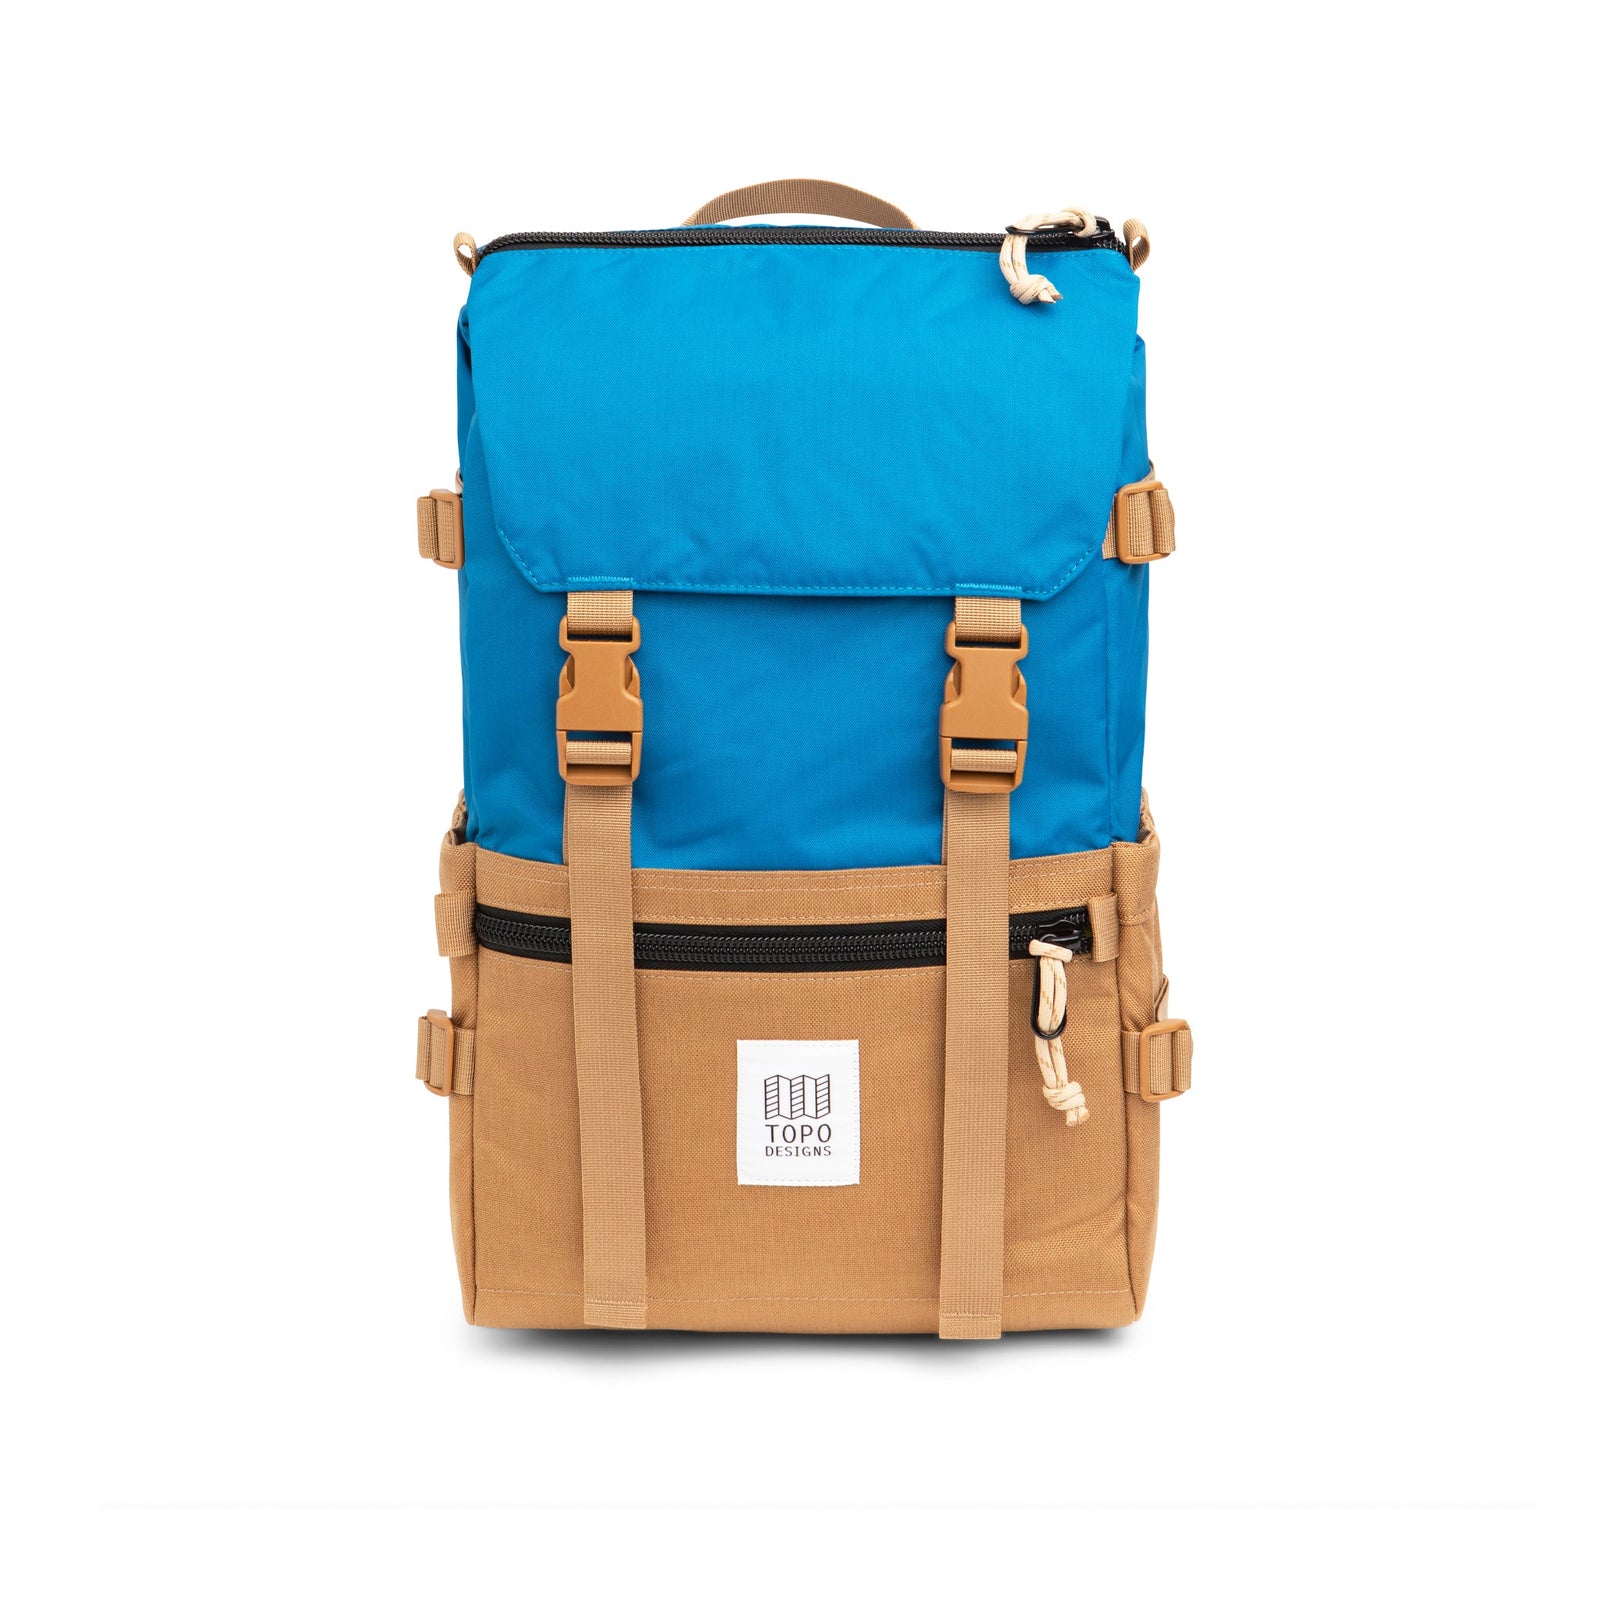 Topo Designs Rover Pack Classic laptop backpack in 100% "Blue / Khaki" nylon.